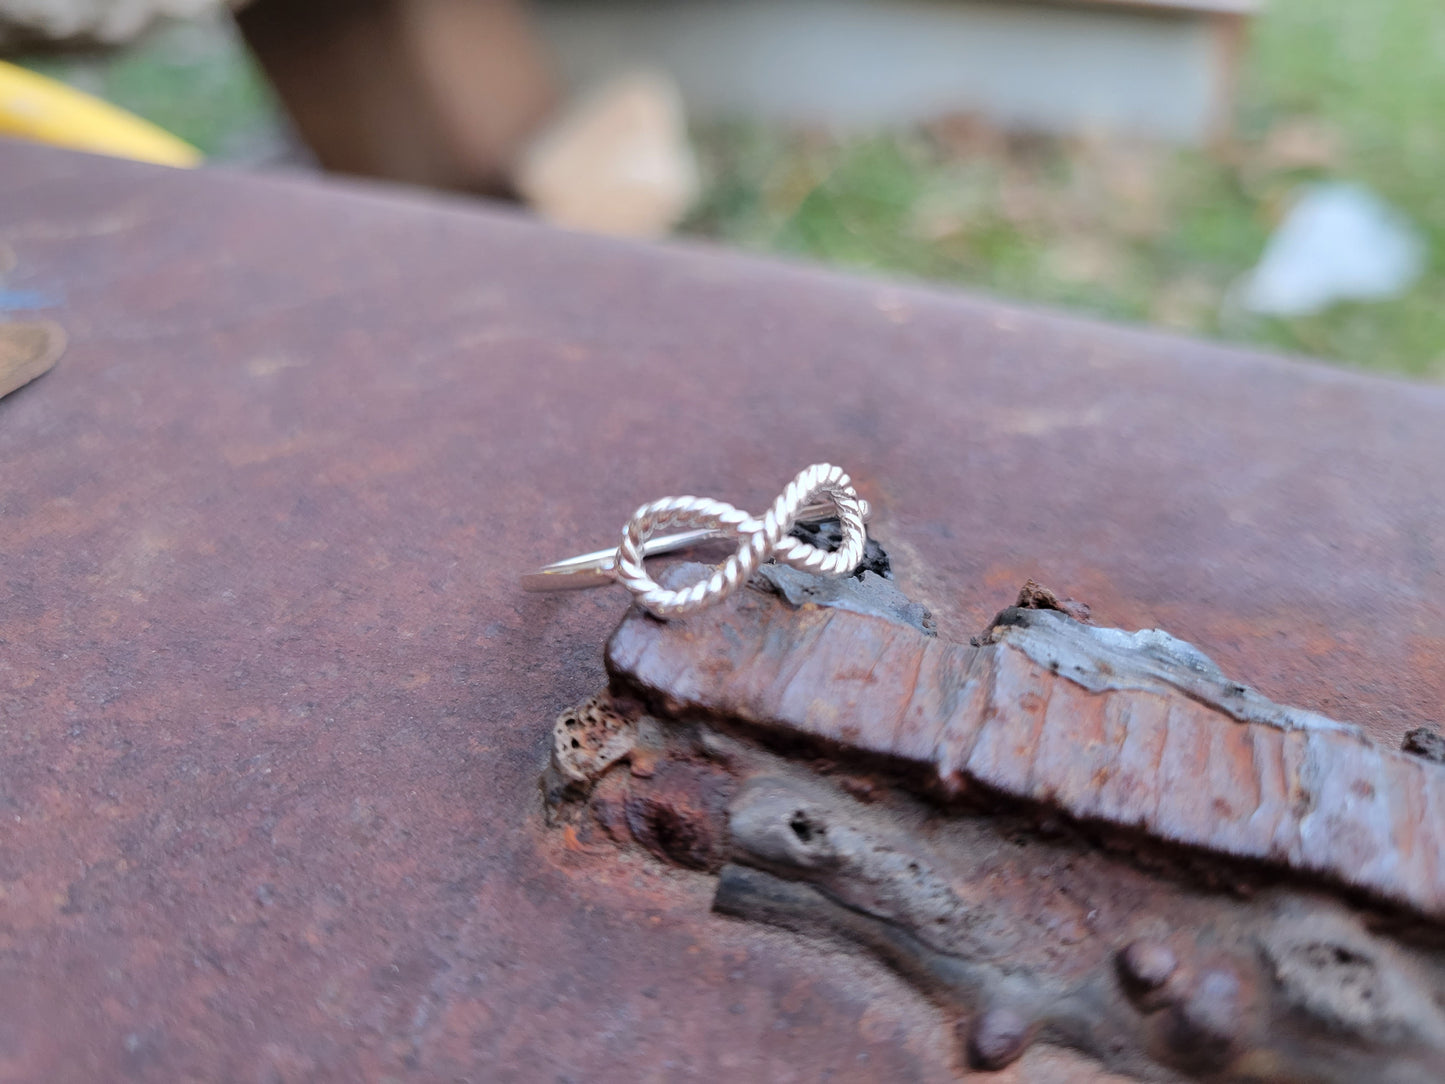 Sterling Silver Infinity Rope Ring, Gifts for her,